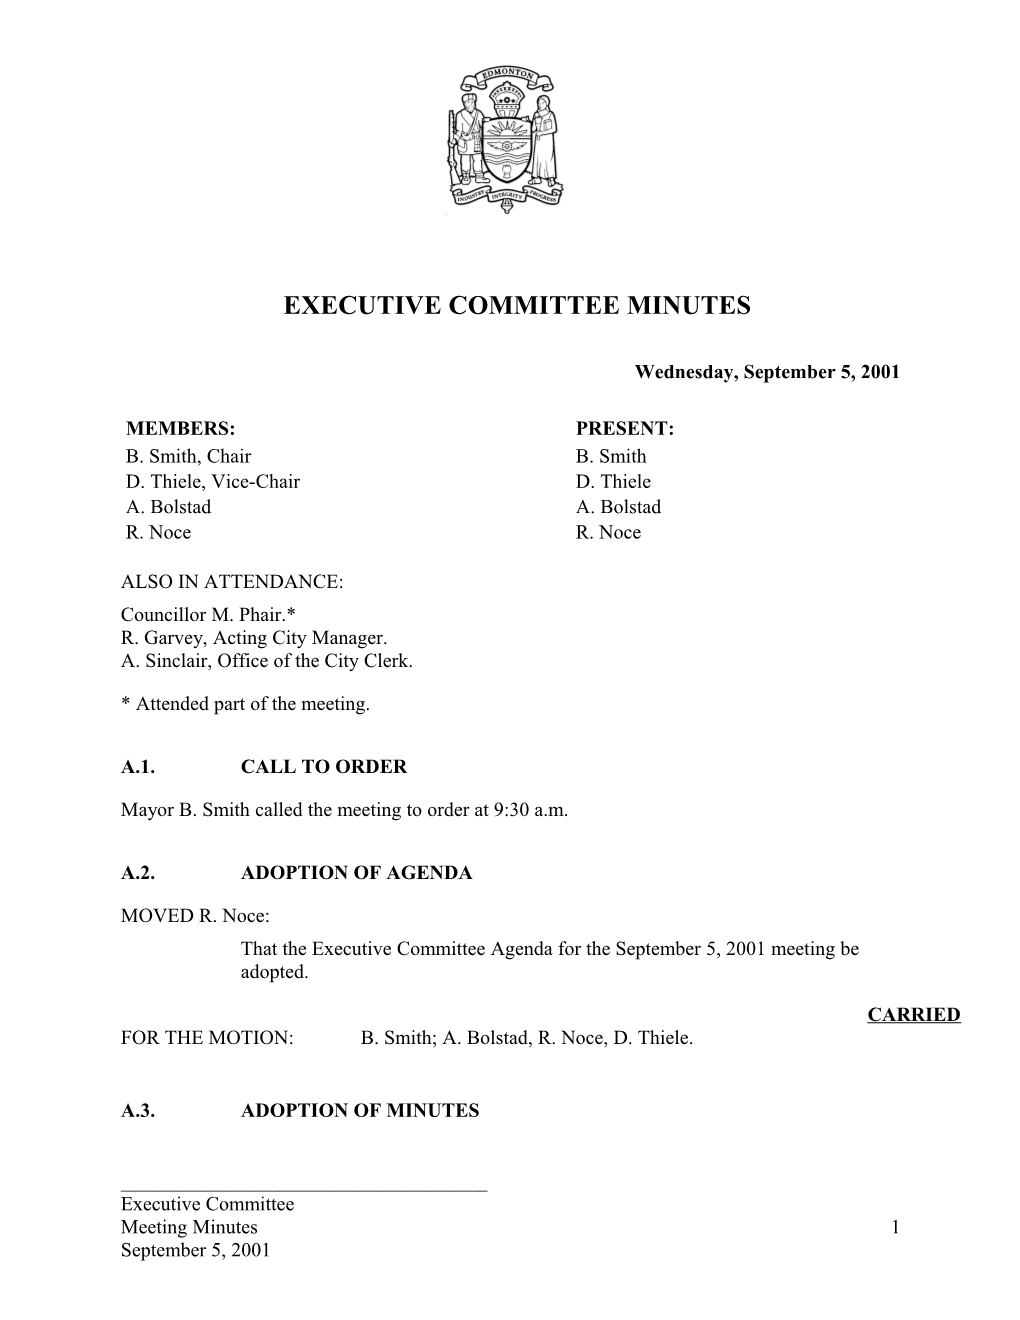 Minutes for Executive Committee September 5, 2001 Meeting